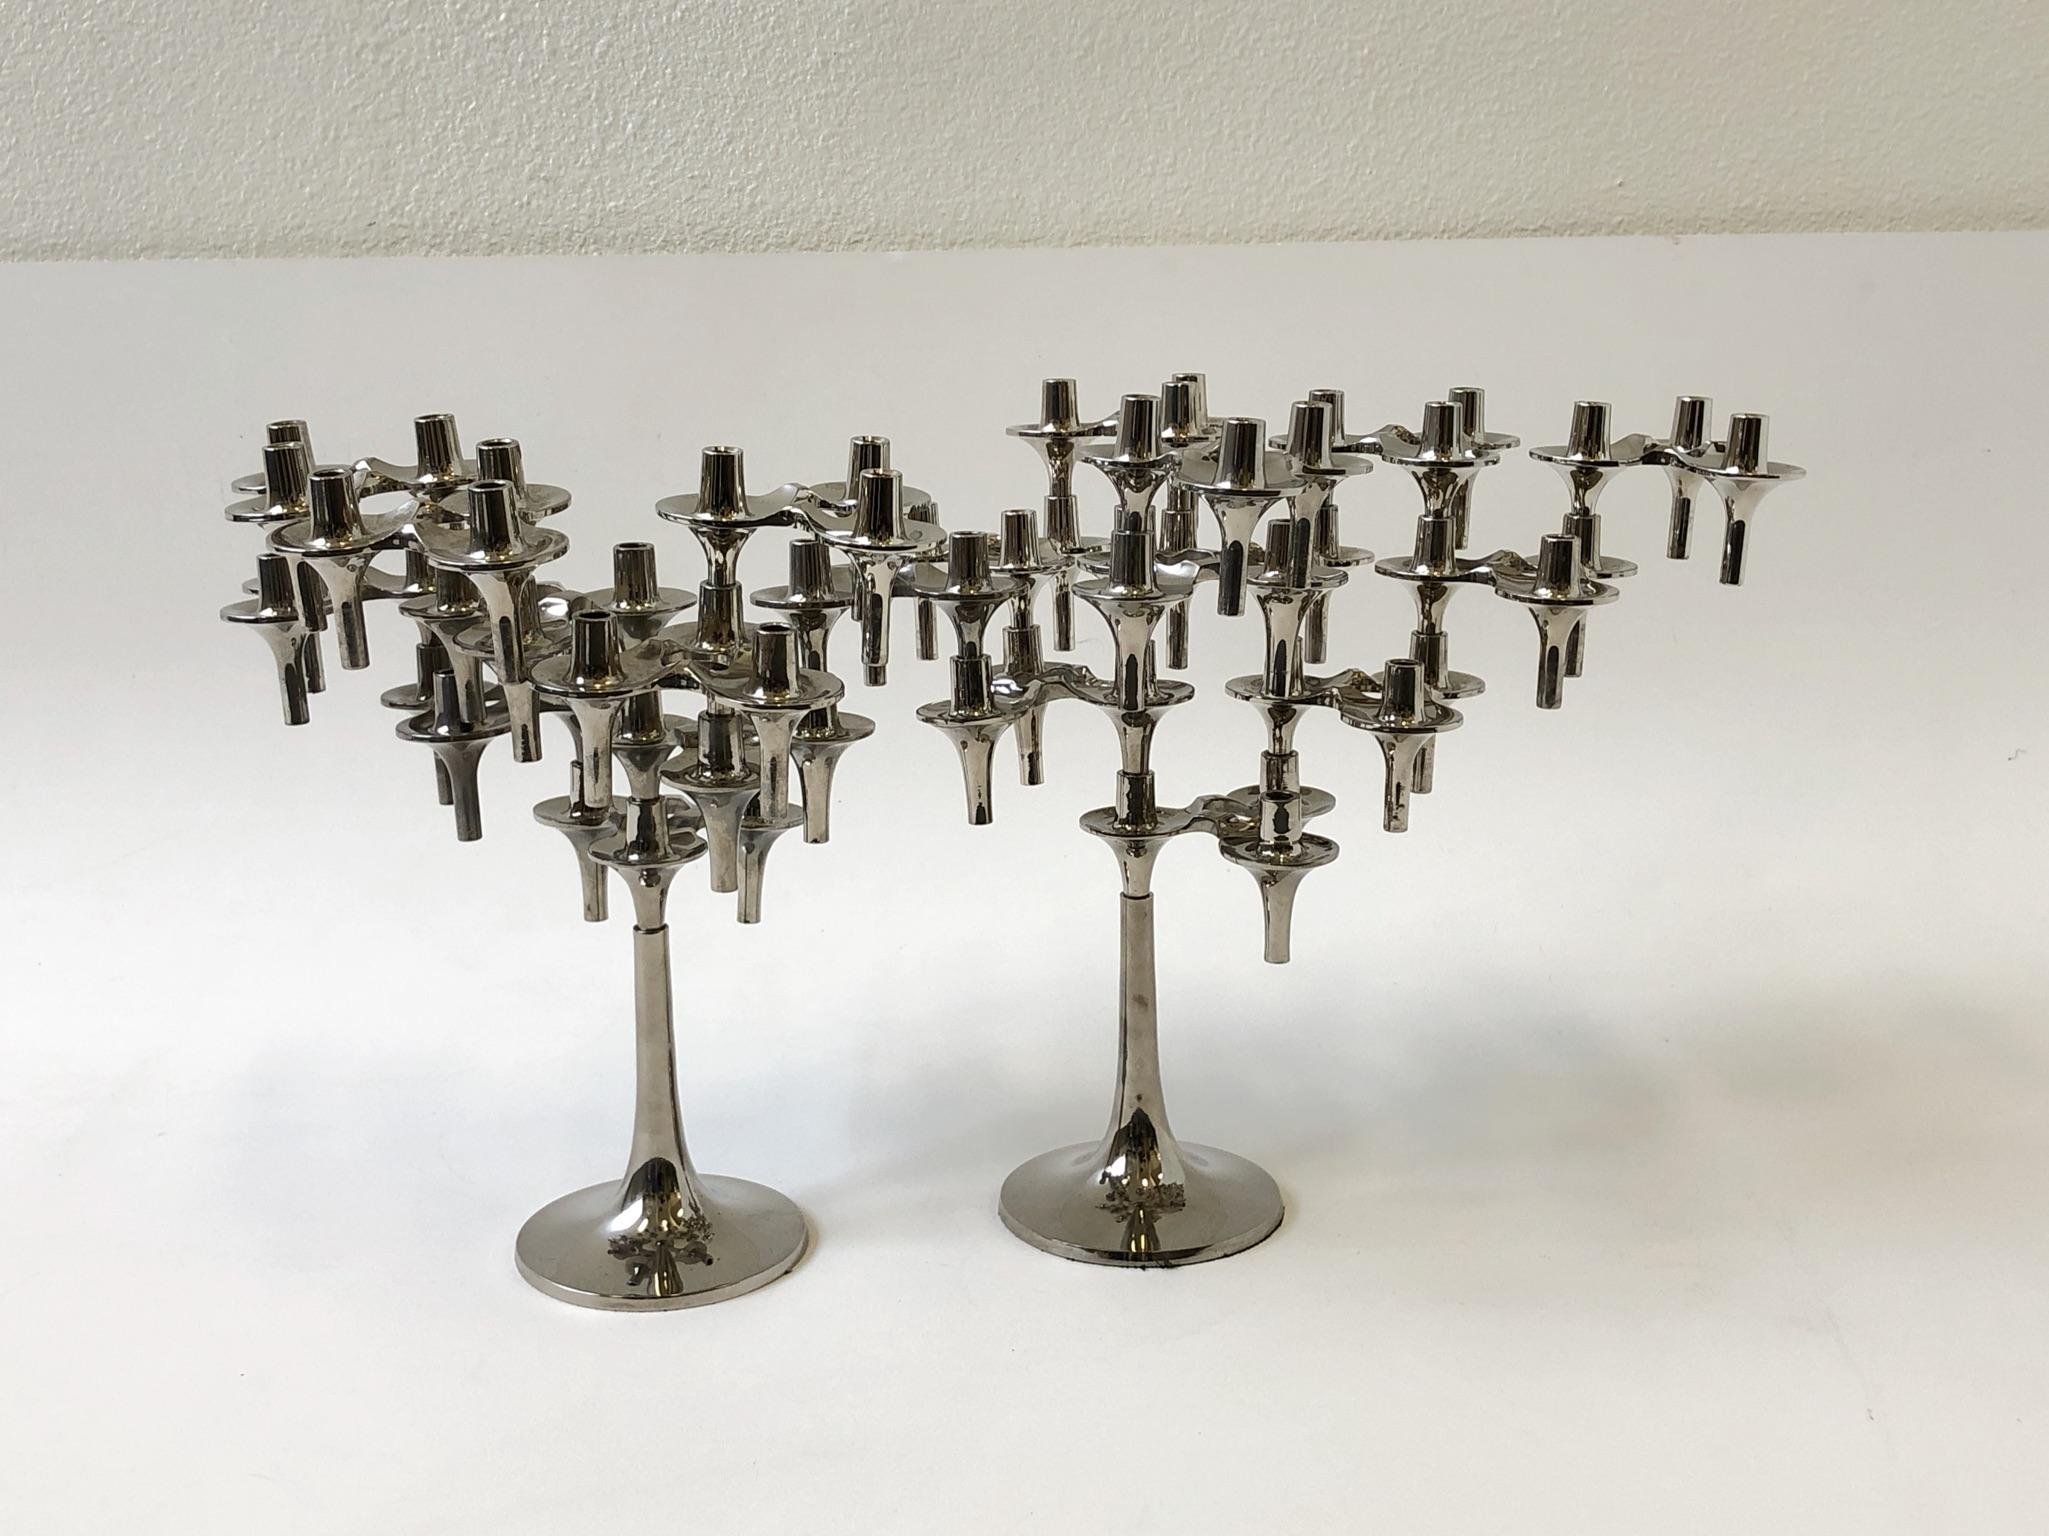 Collection of 21 German polish chrome sculptural stackable candleholders designed by Ceasar Stoffi for BMF Nagel in the 1960’s. 
The two bases have three that are attached and 15 are loose to arrange as desired. 

In original vintage condition